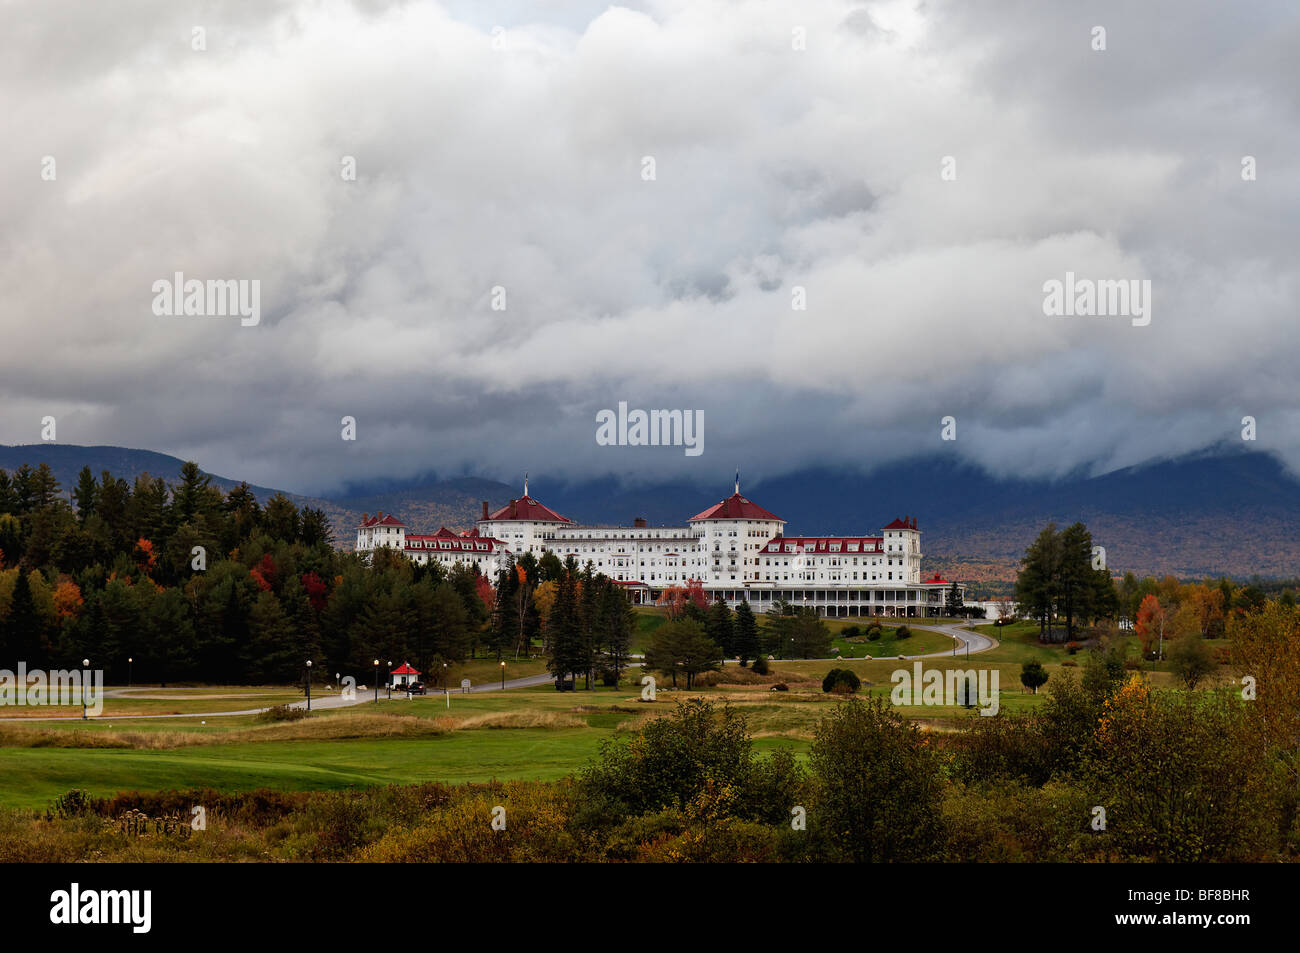 Mount Washington Hotel in Coos County, New Hampshire Stock Photo